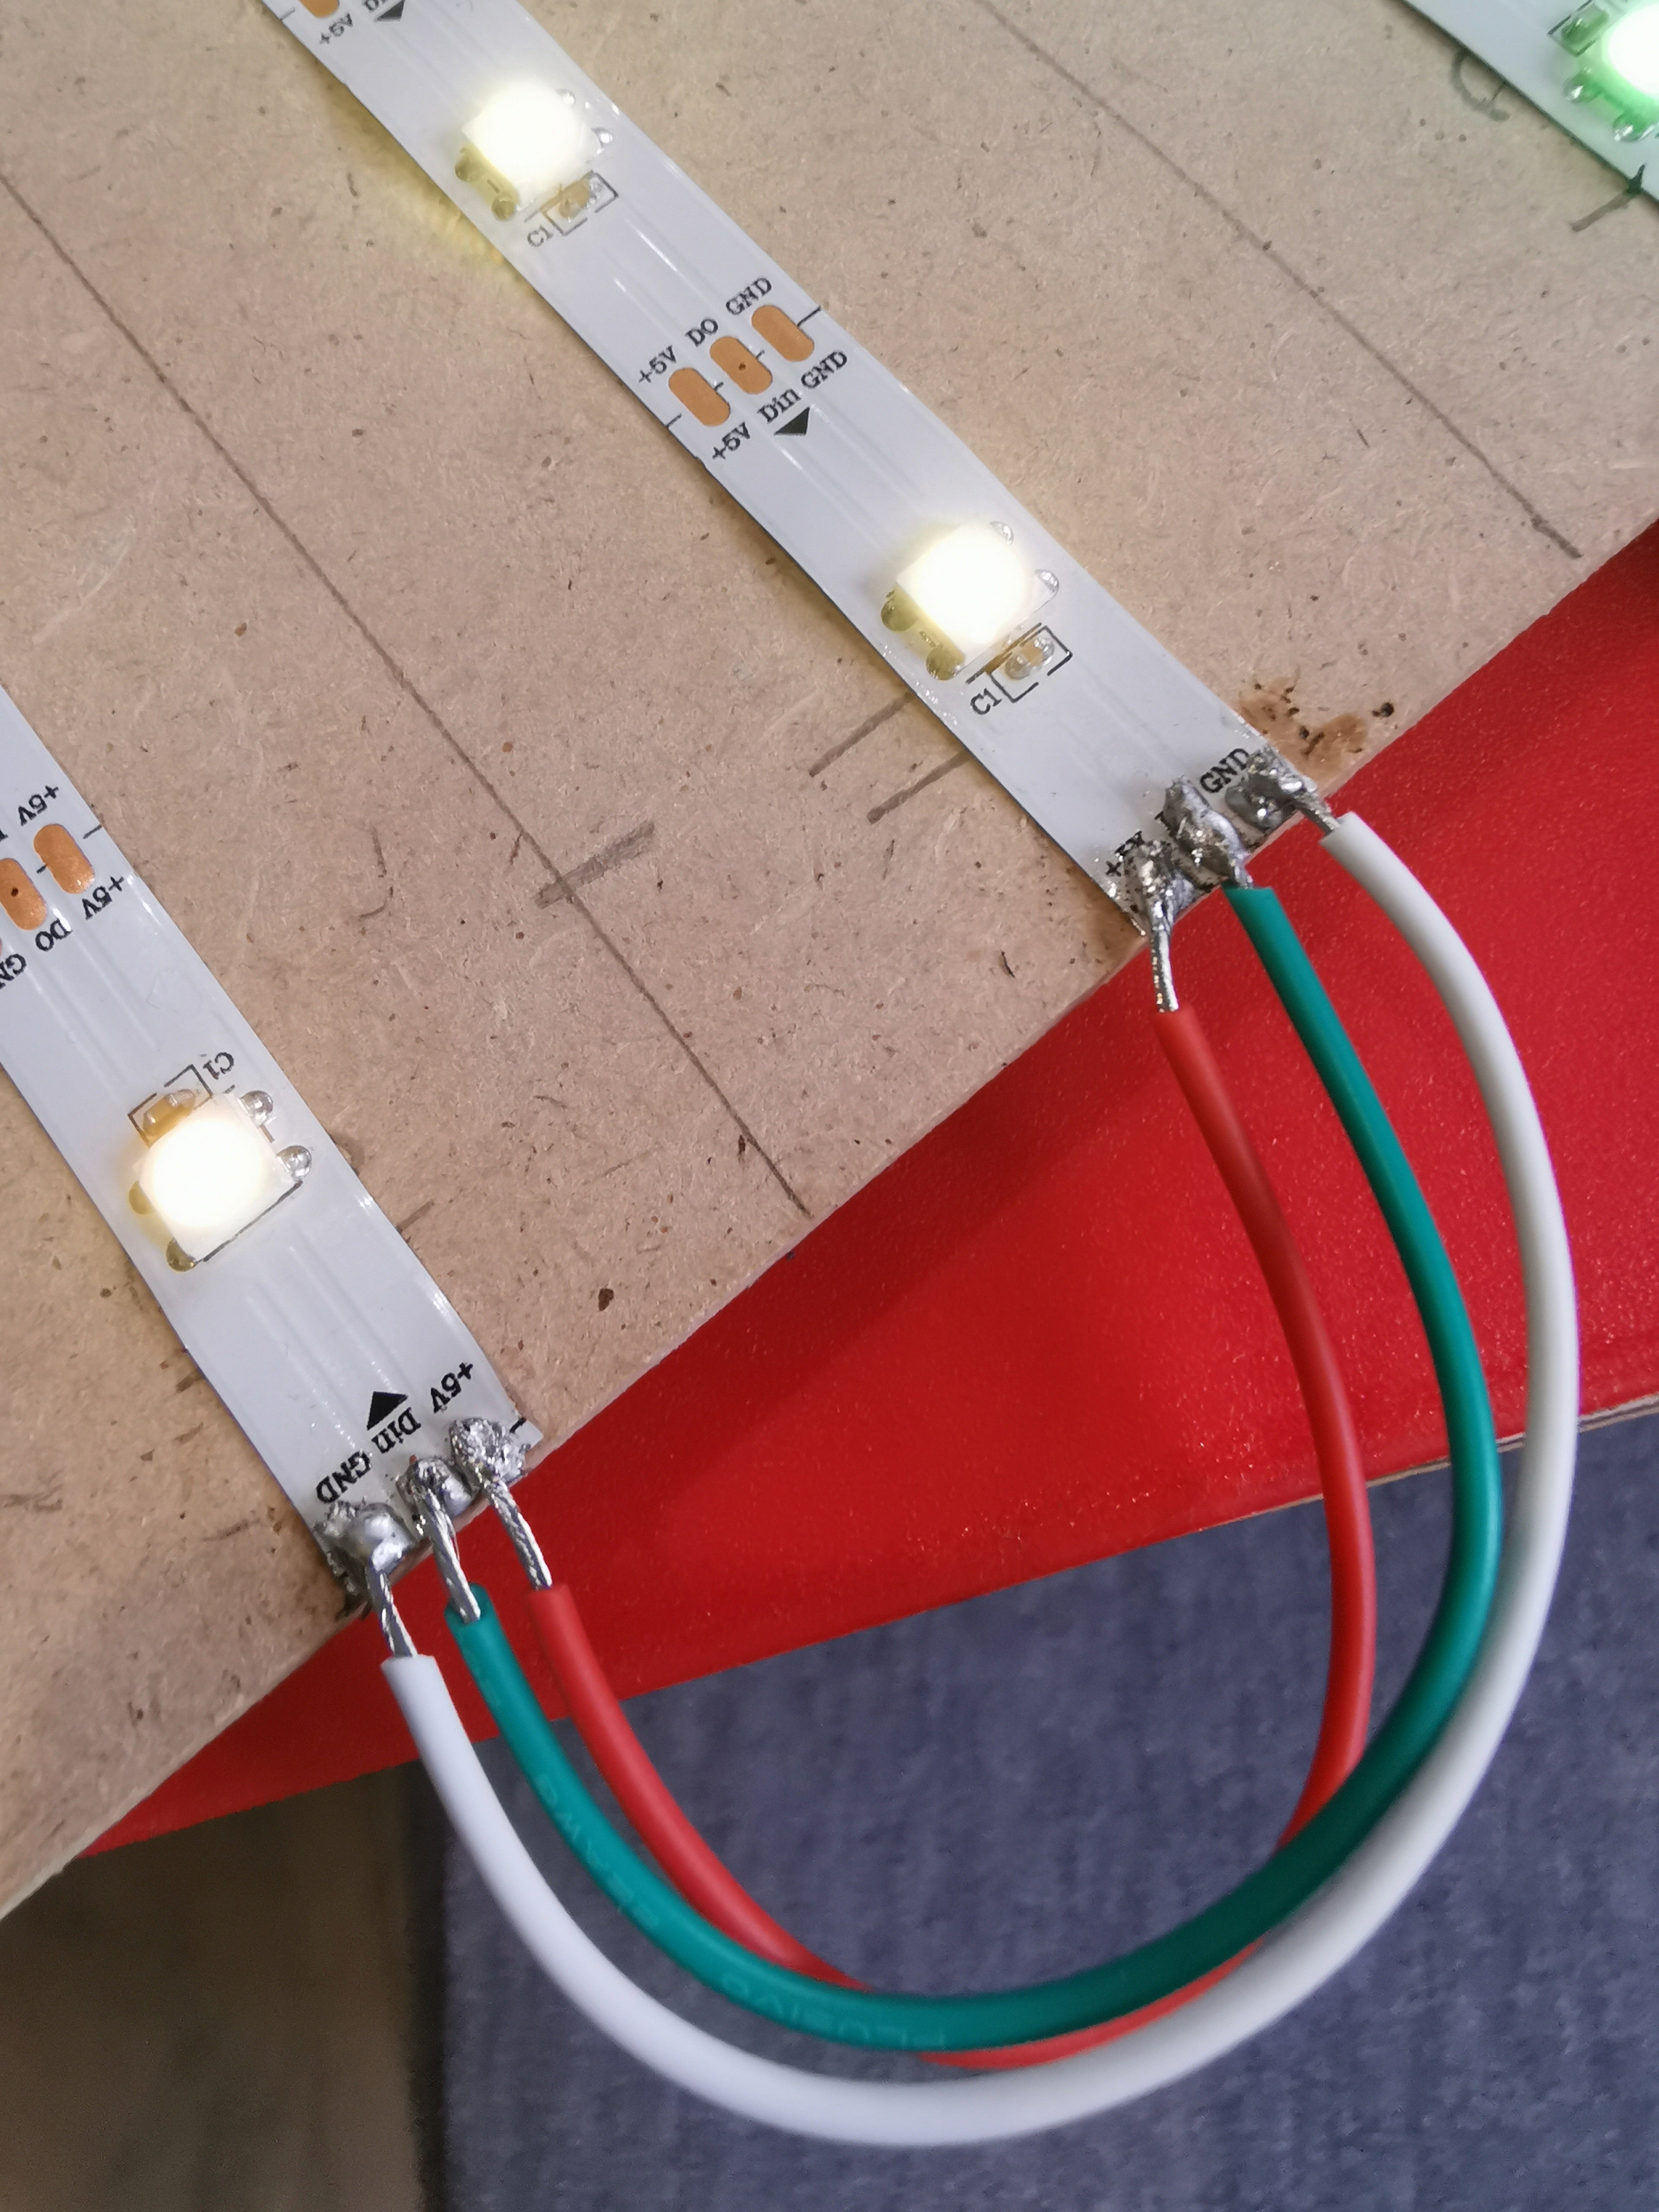 Connect each light strip at the end of each line.